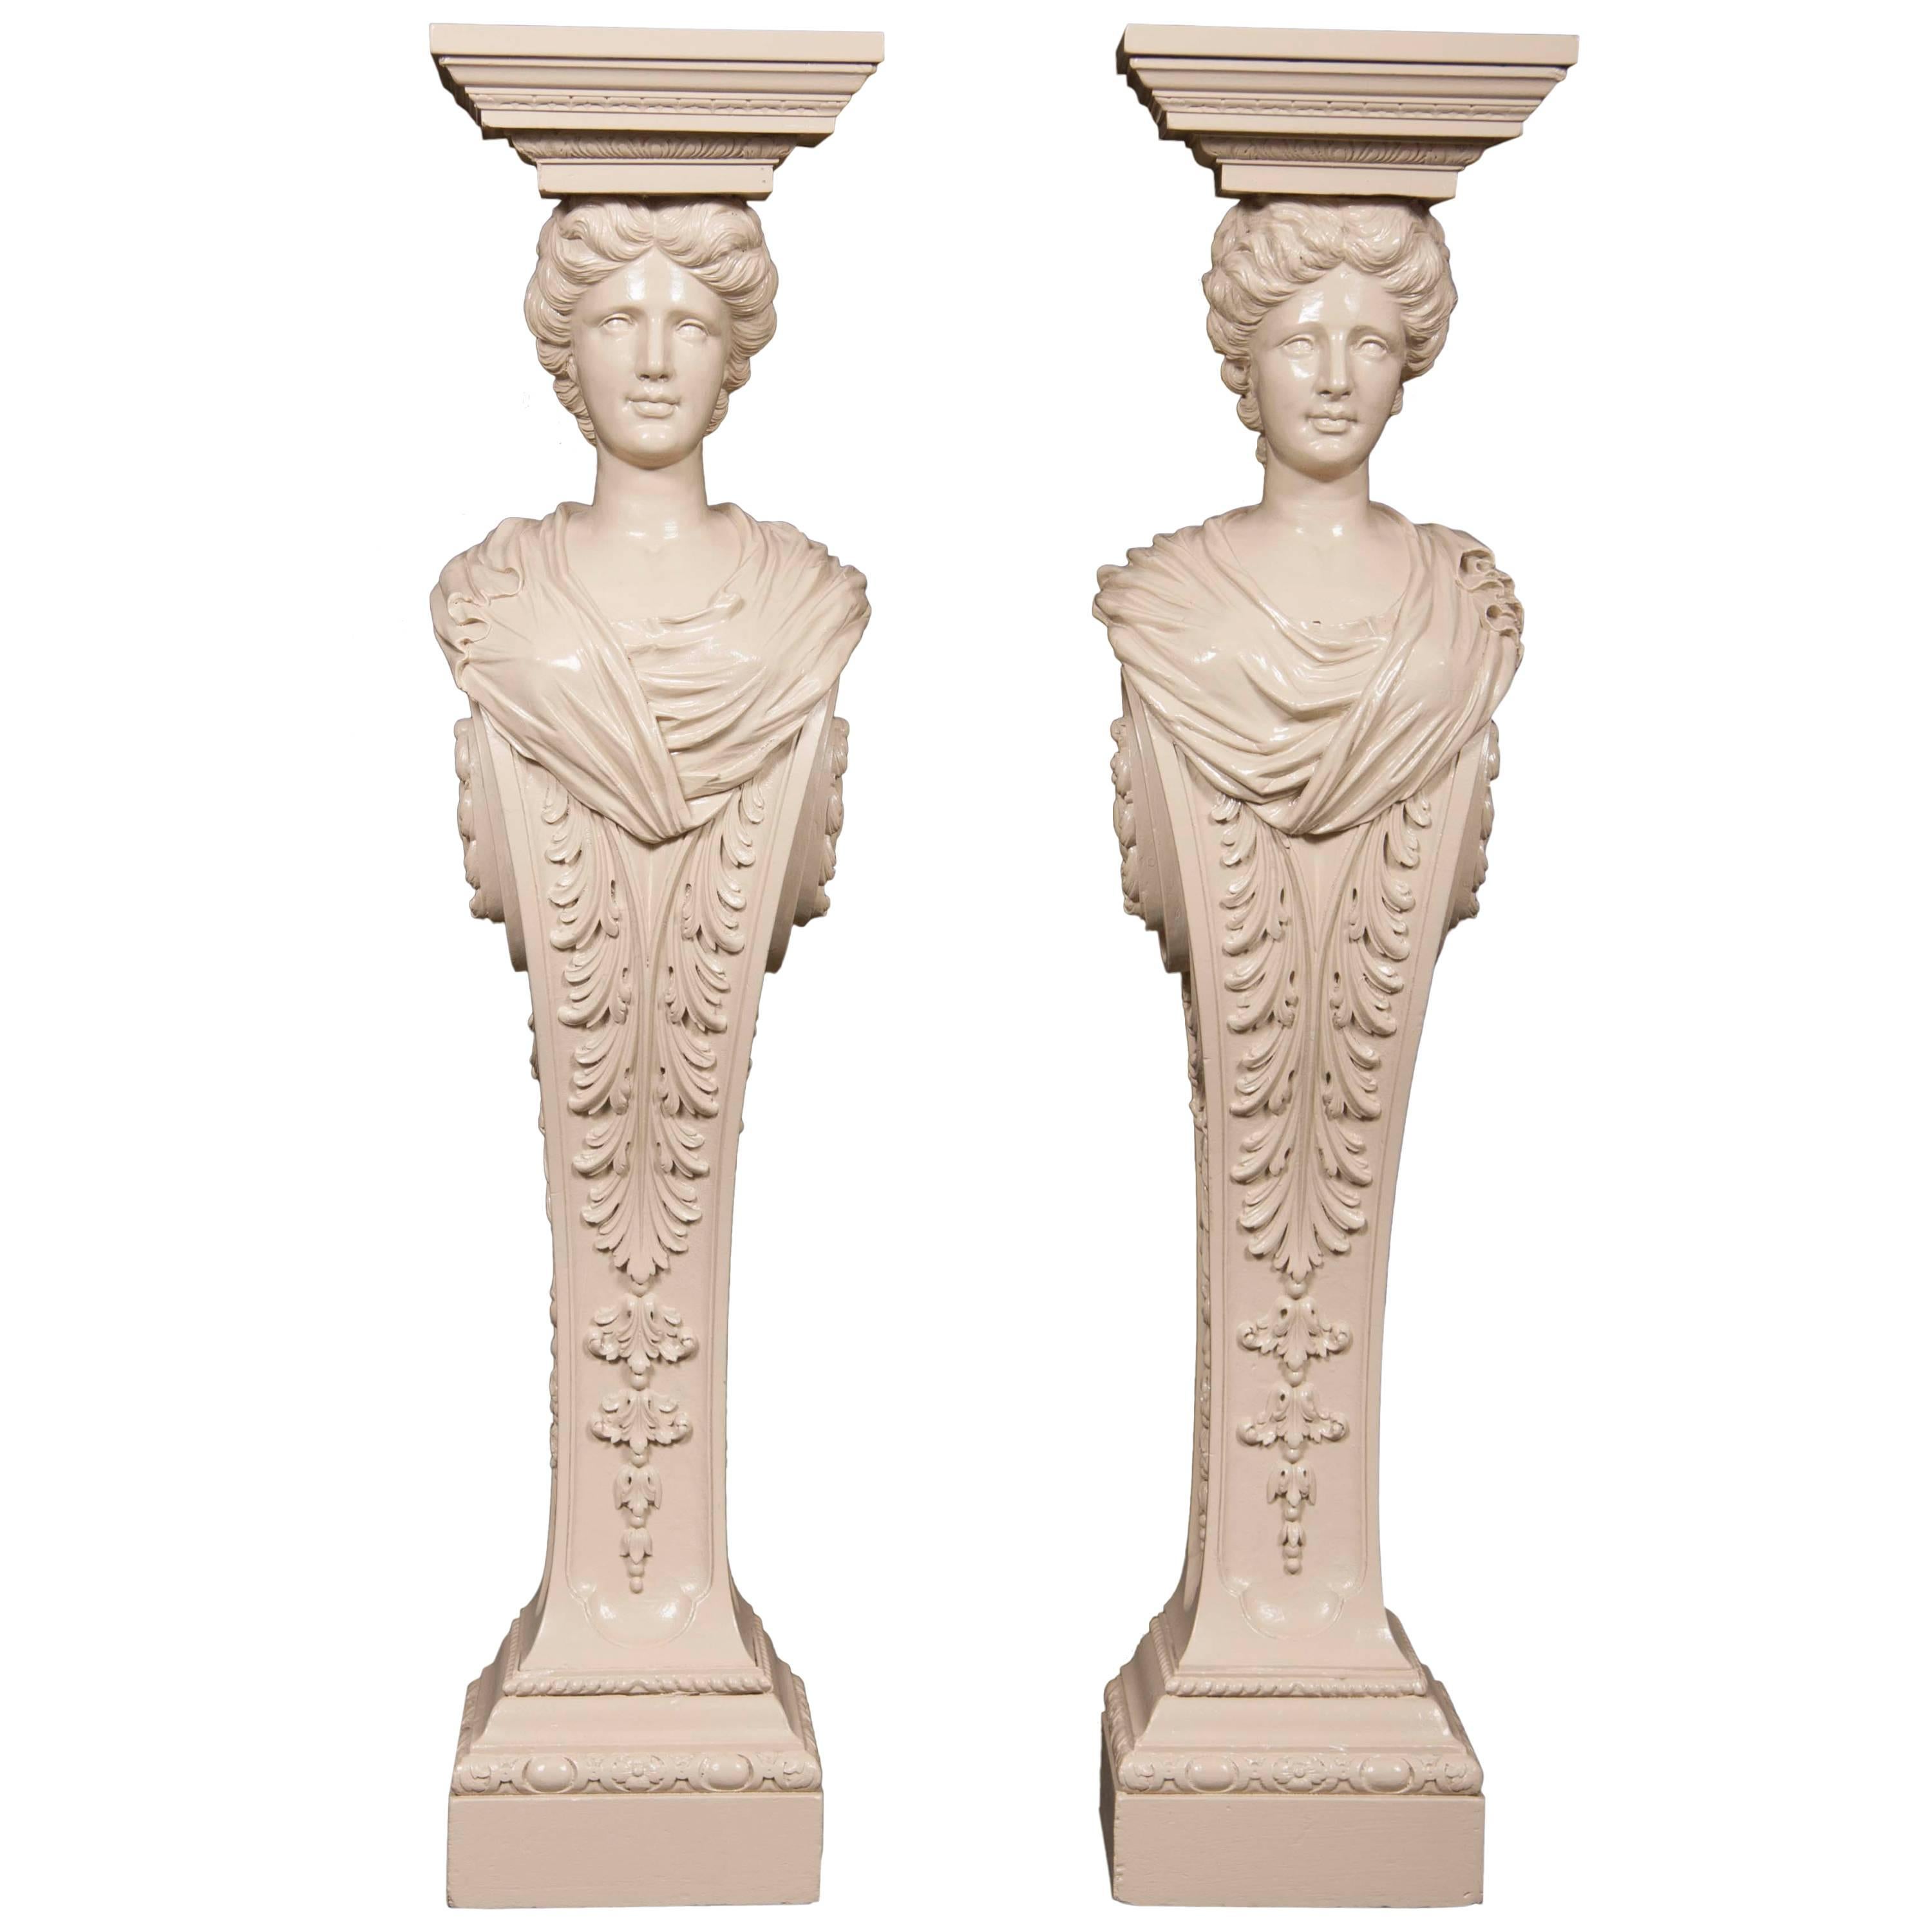 Pair of Lacquered Carved Wood Pedestals in the Manner of William Kent